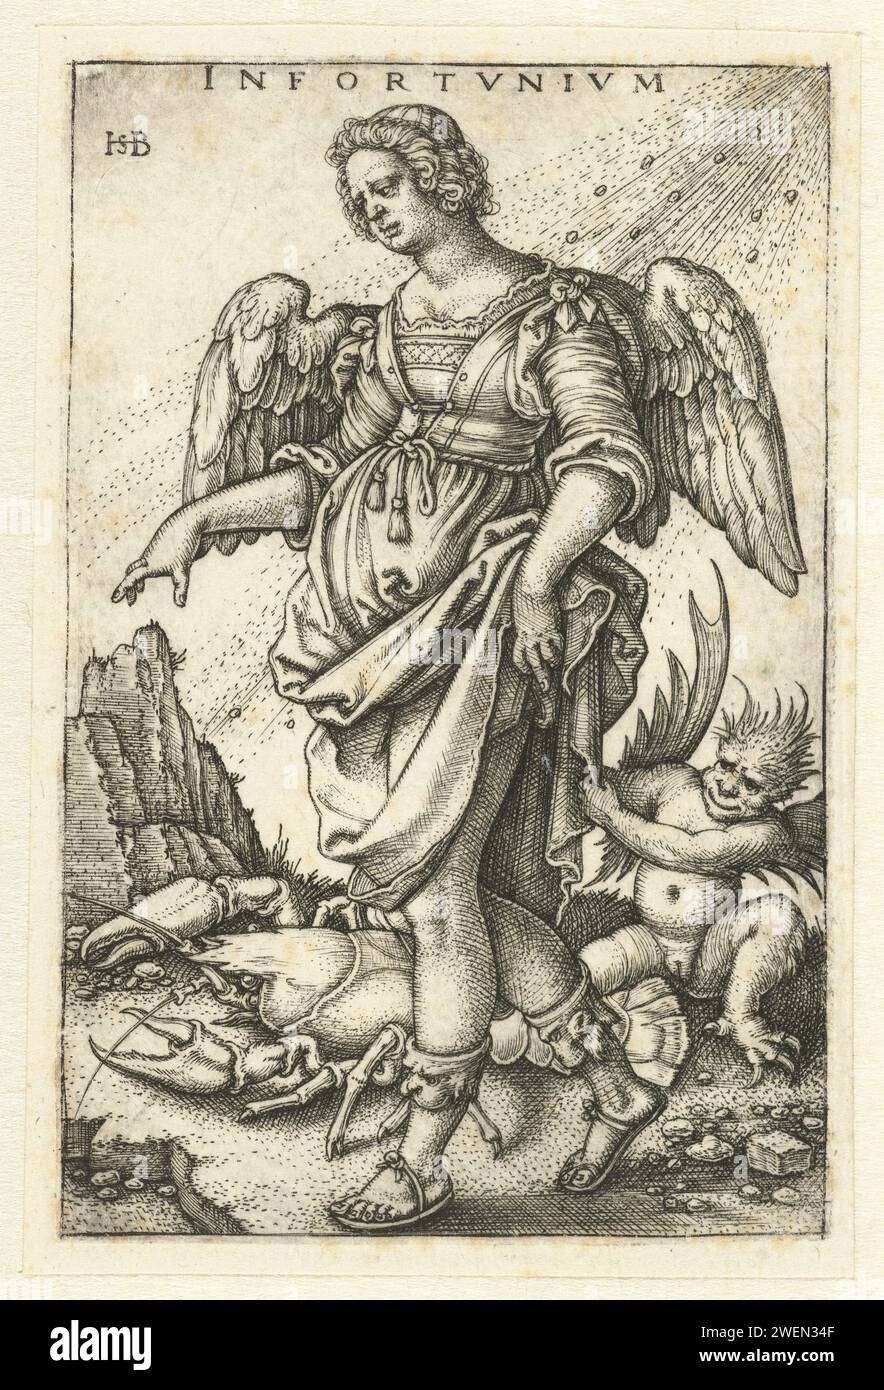 Hans Sebald Beham, 1510 - 1550 print Winged woman as a personification of accident (Infortunio) with a scorpion and the devil  paper engraving Adversity, Misfortune, Bad Luck; 'Fortuna infelice', 'Infortunio' (Ripa). scorpions. devil(s) and demons Stock Photo